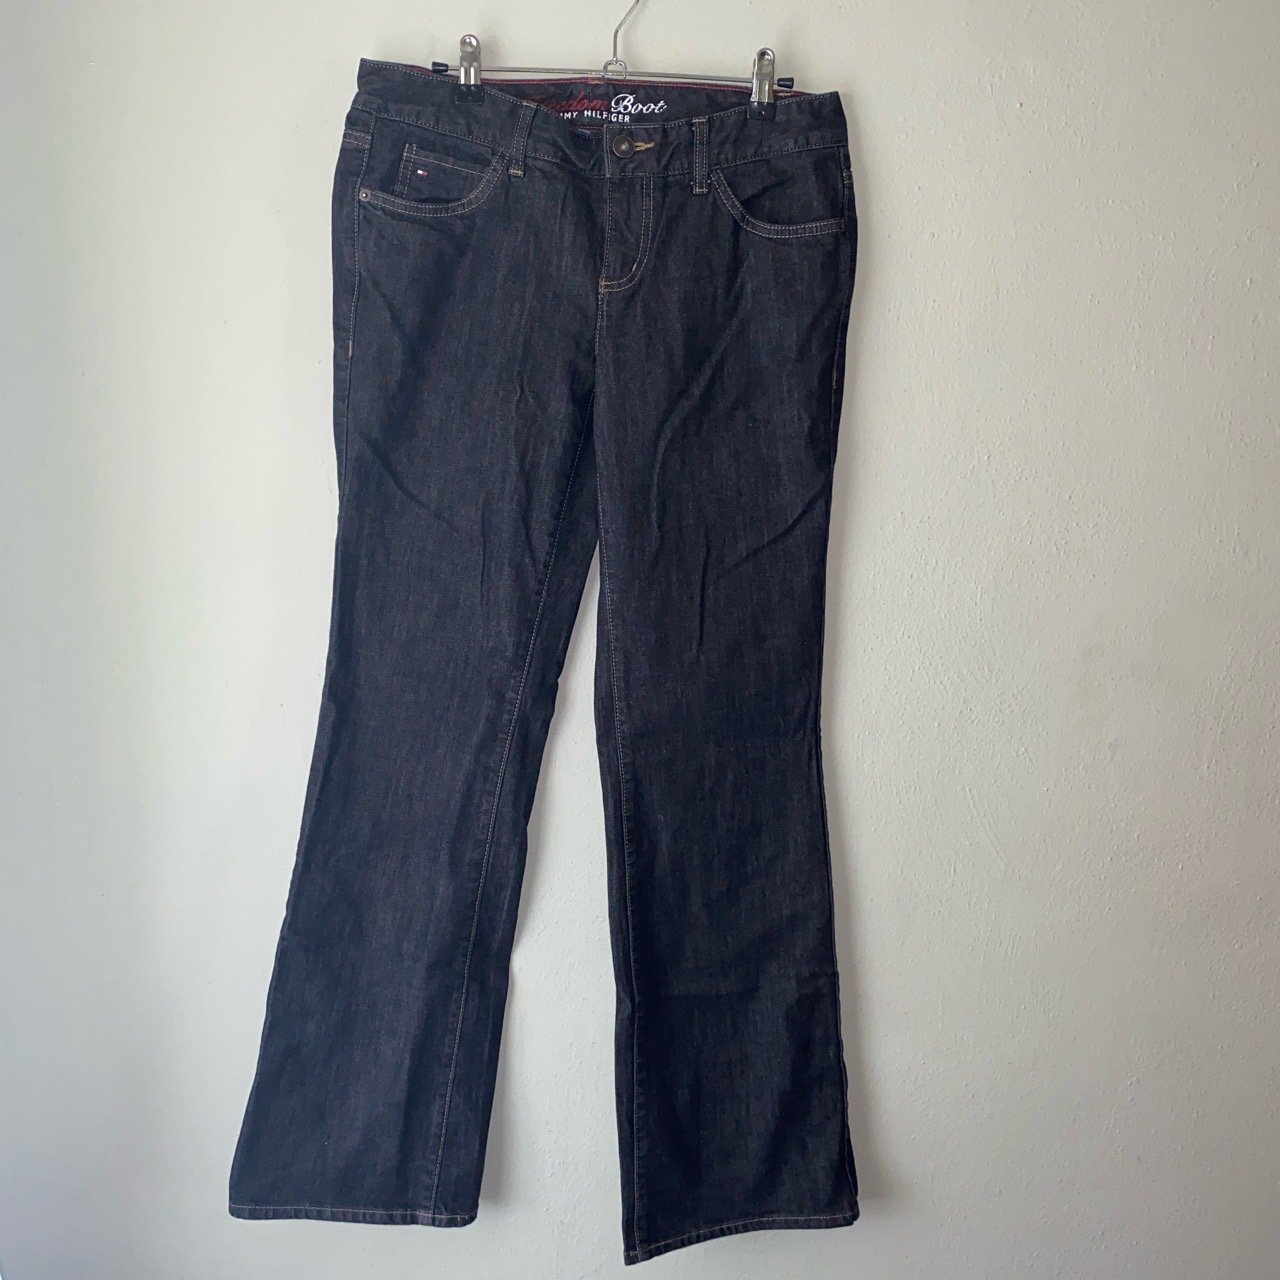 High quality Tommy Hilfiger Jeans Boot Cut Black Denim Ifocwmbd2 Outlet Store